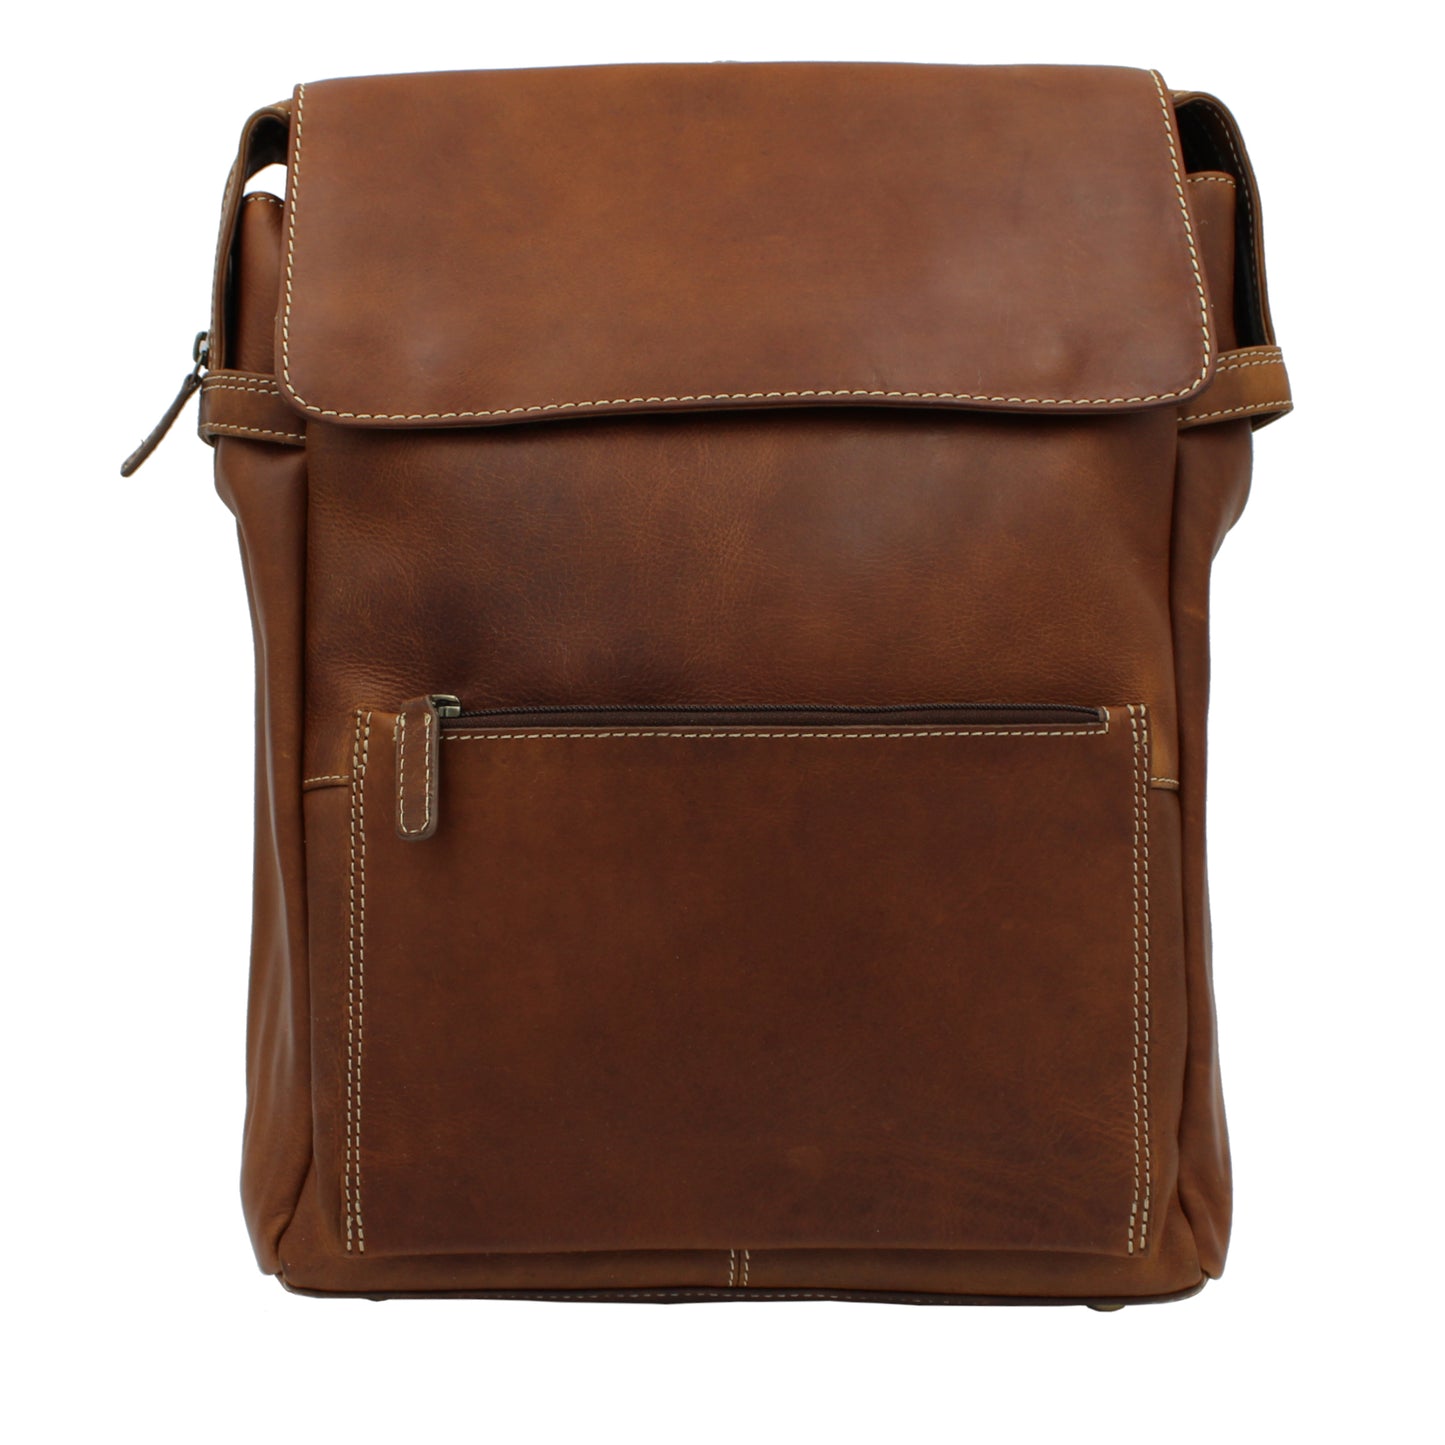 RE Leather Back Pack (11.5"x 15.5"x 4.5")